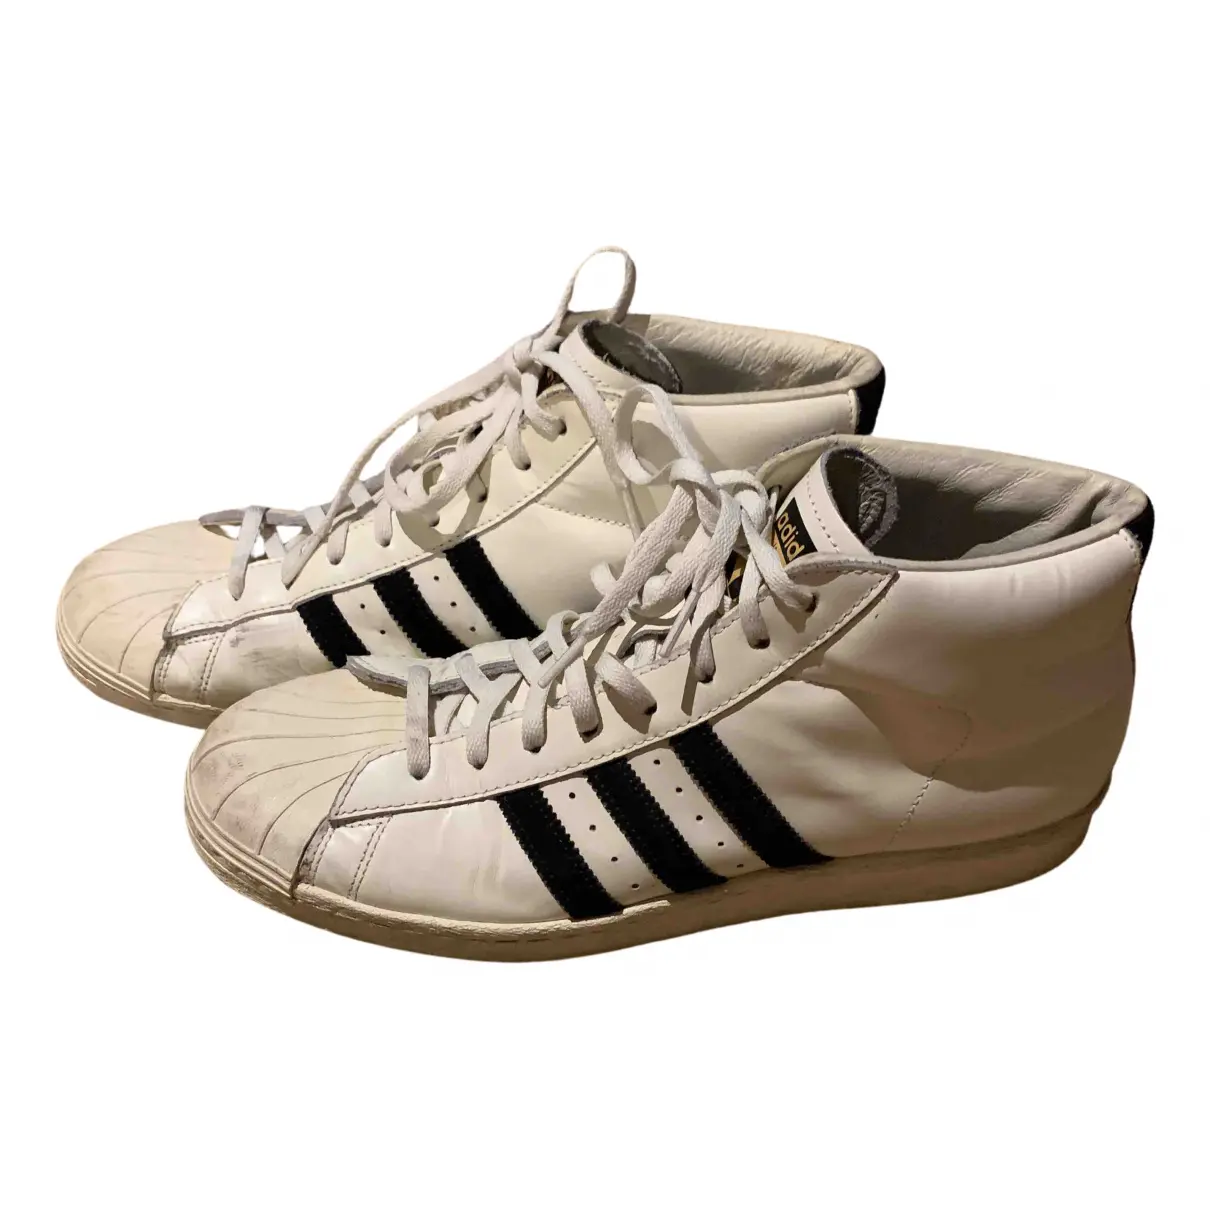 Superstar leather high trainers Adidas